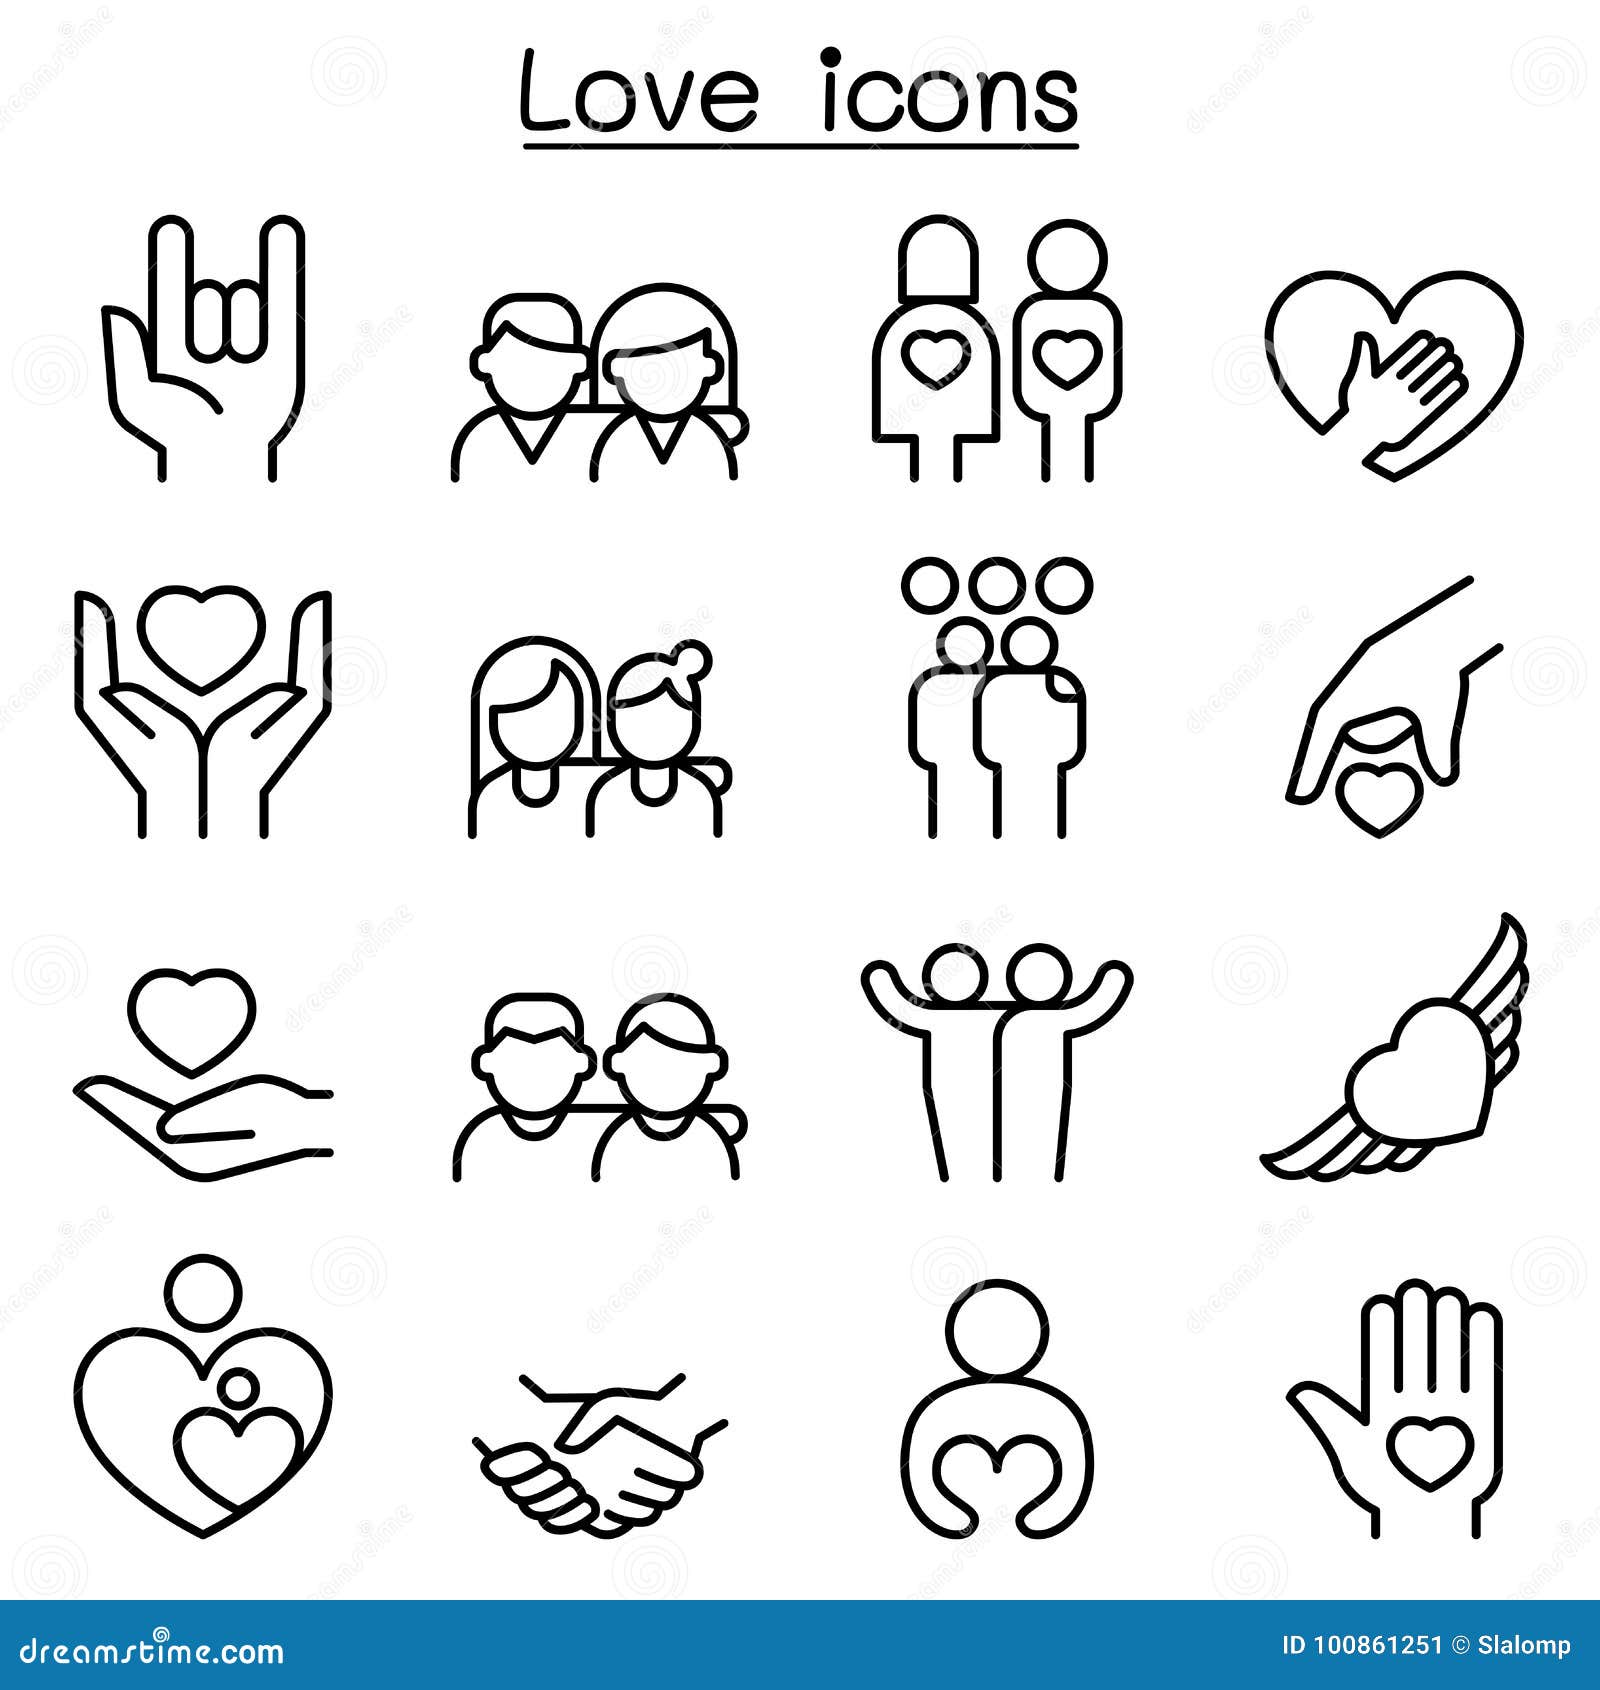 love, relationship, friend, family icon set in thin line style